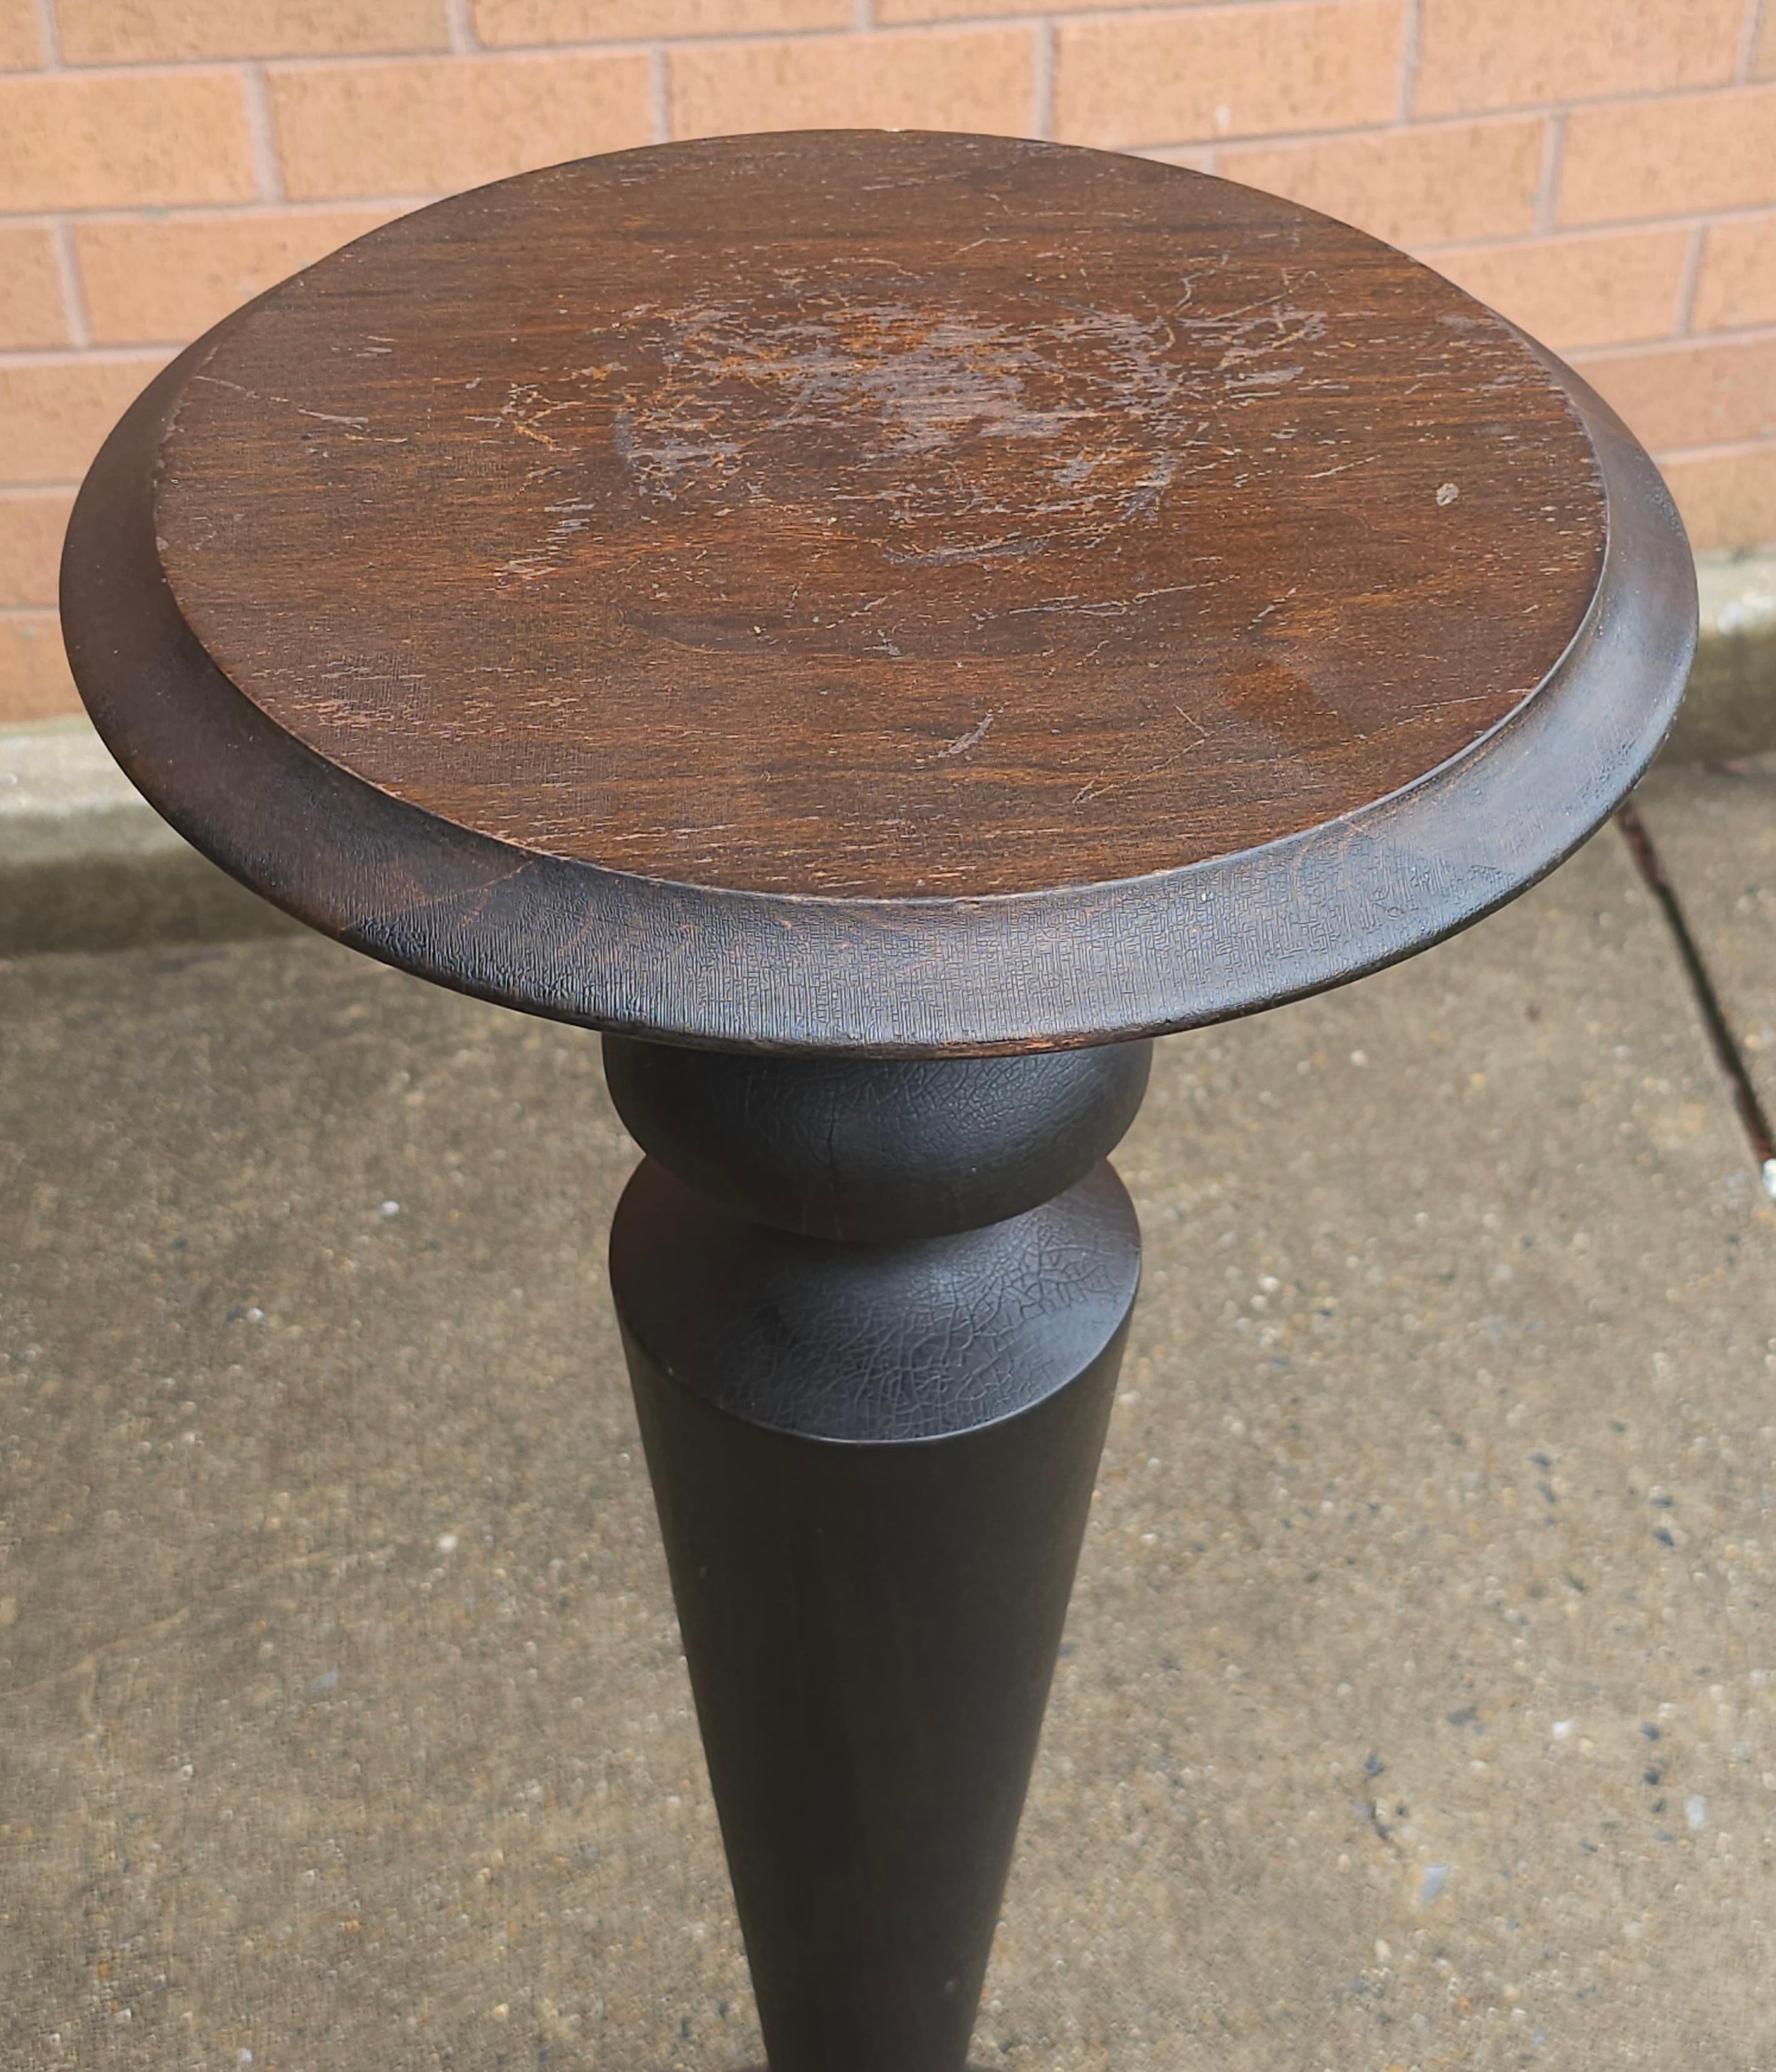 Late 19th Century Neoclassical Stained Mahogany Pedestal In Good Condition For Sale In Germantown, MD